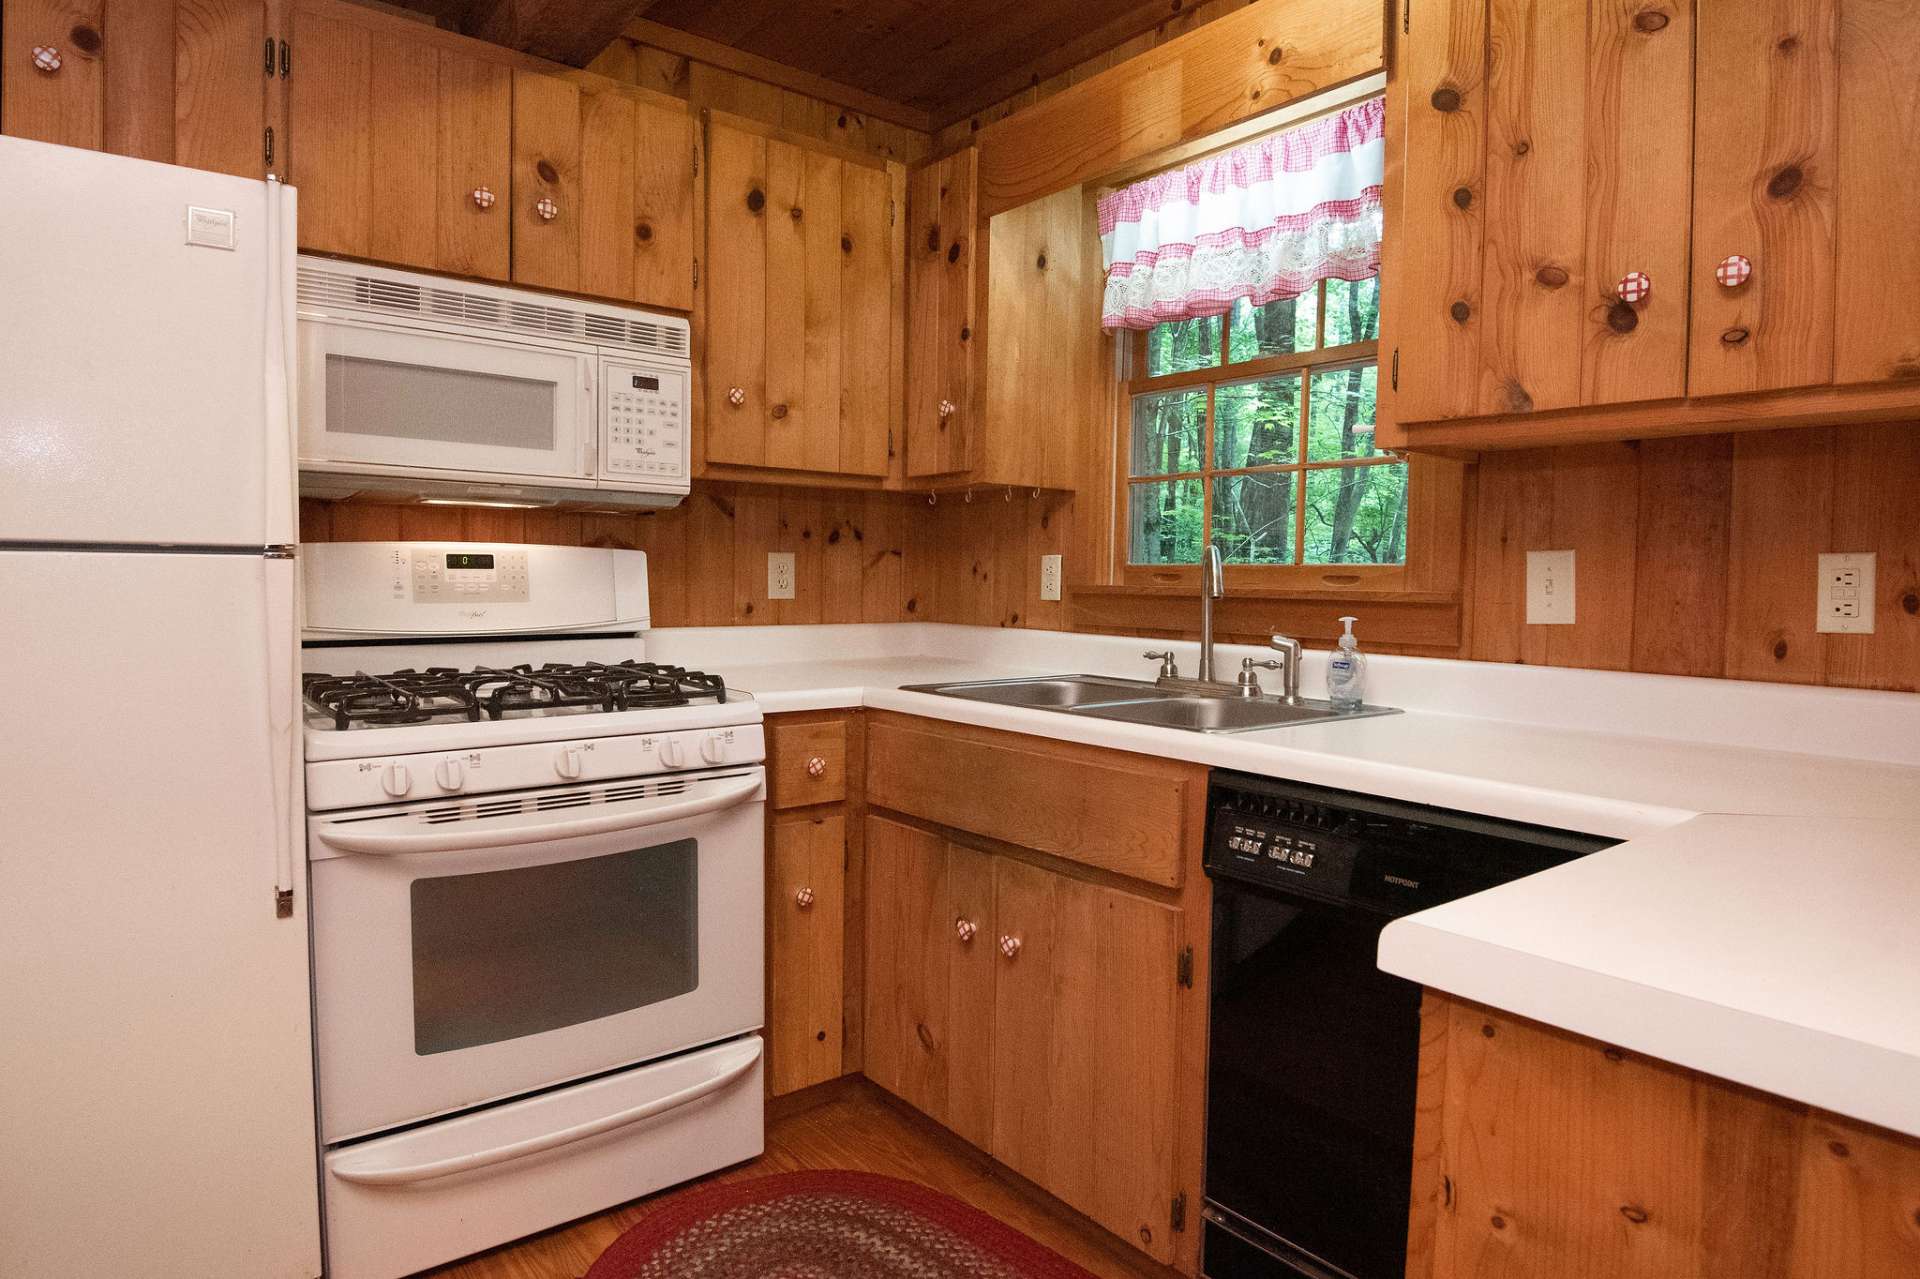 There's nothing missing in this kitchen equipped with gas range, built-in hood microwave and dishwasher.